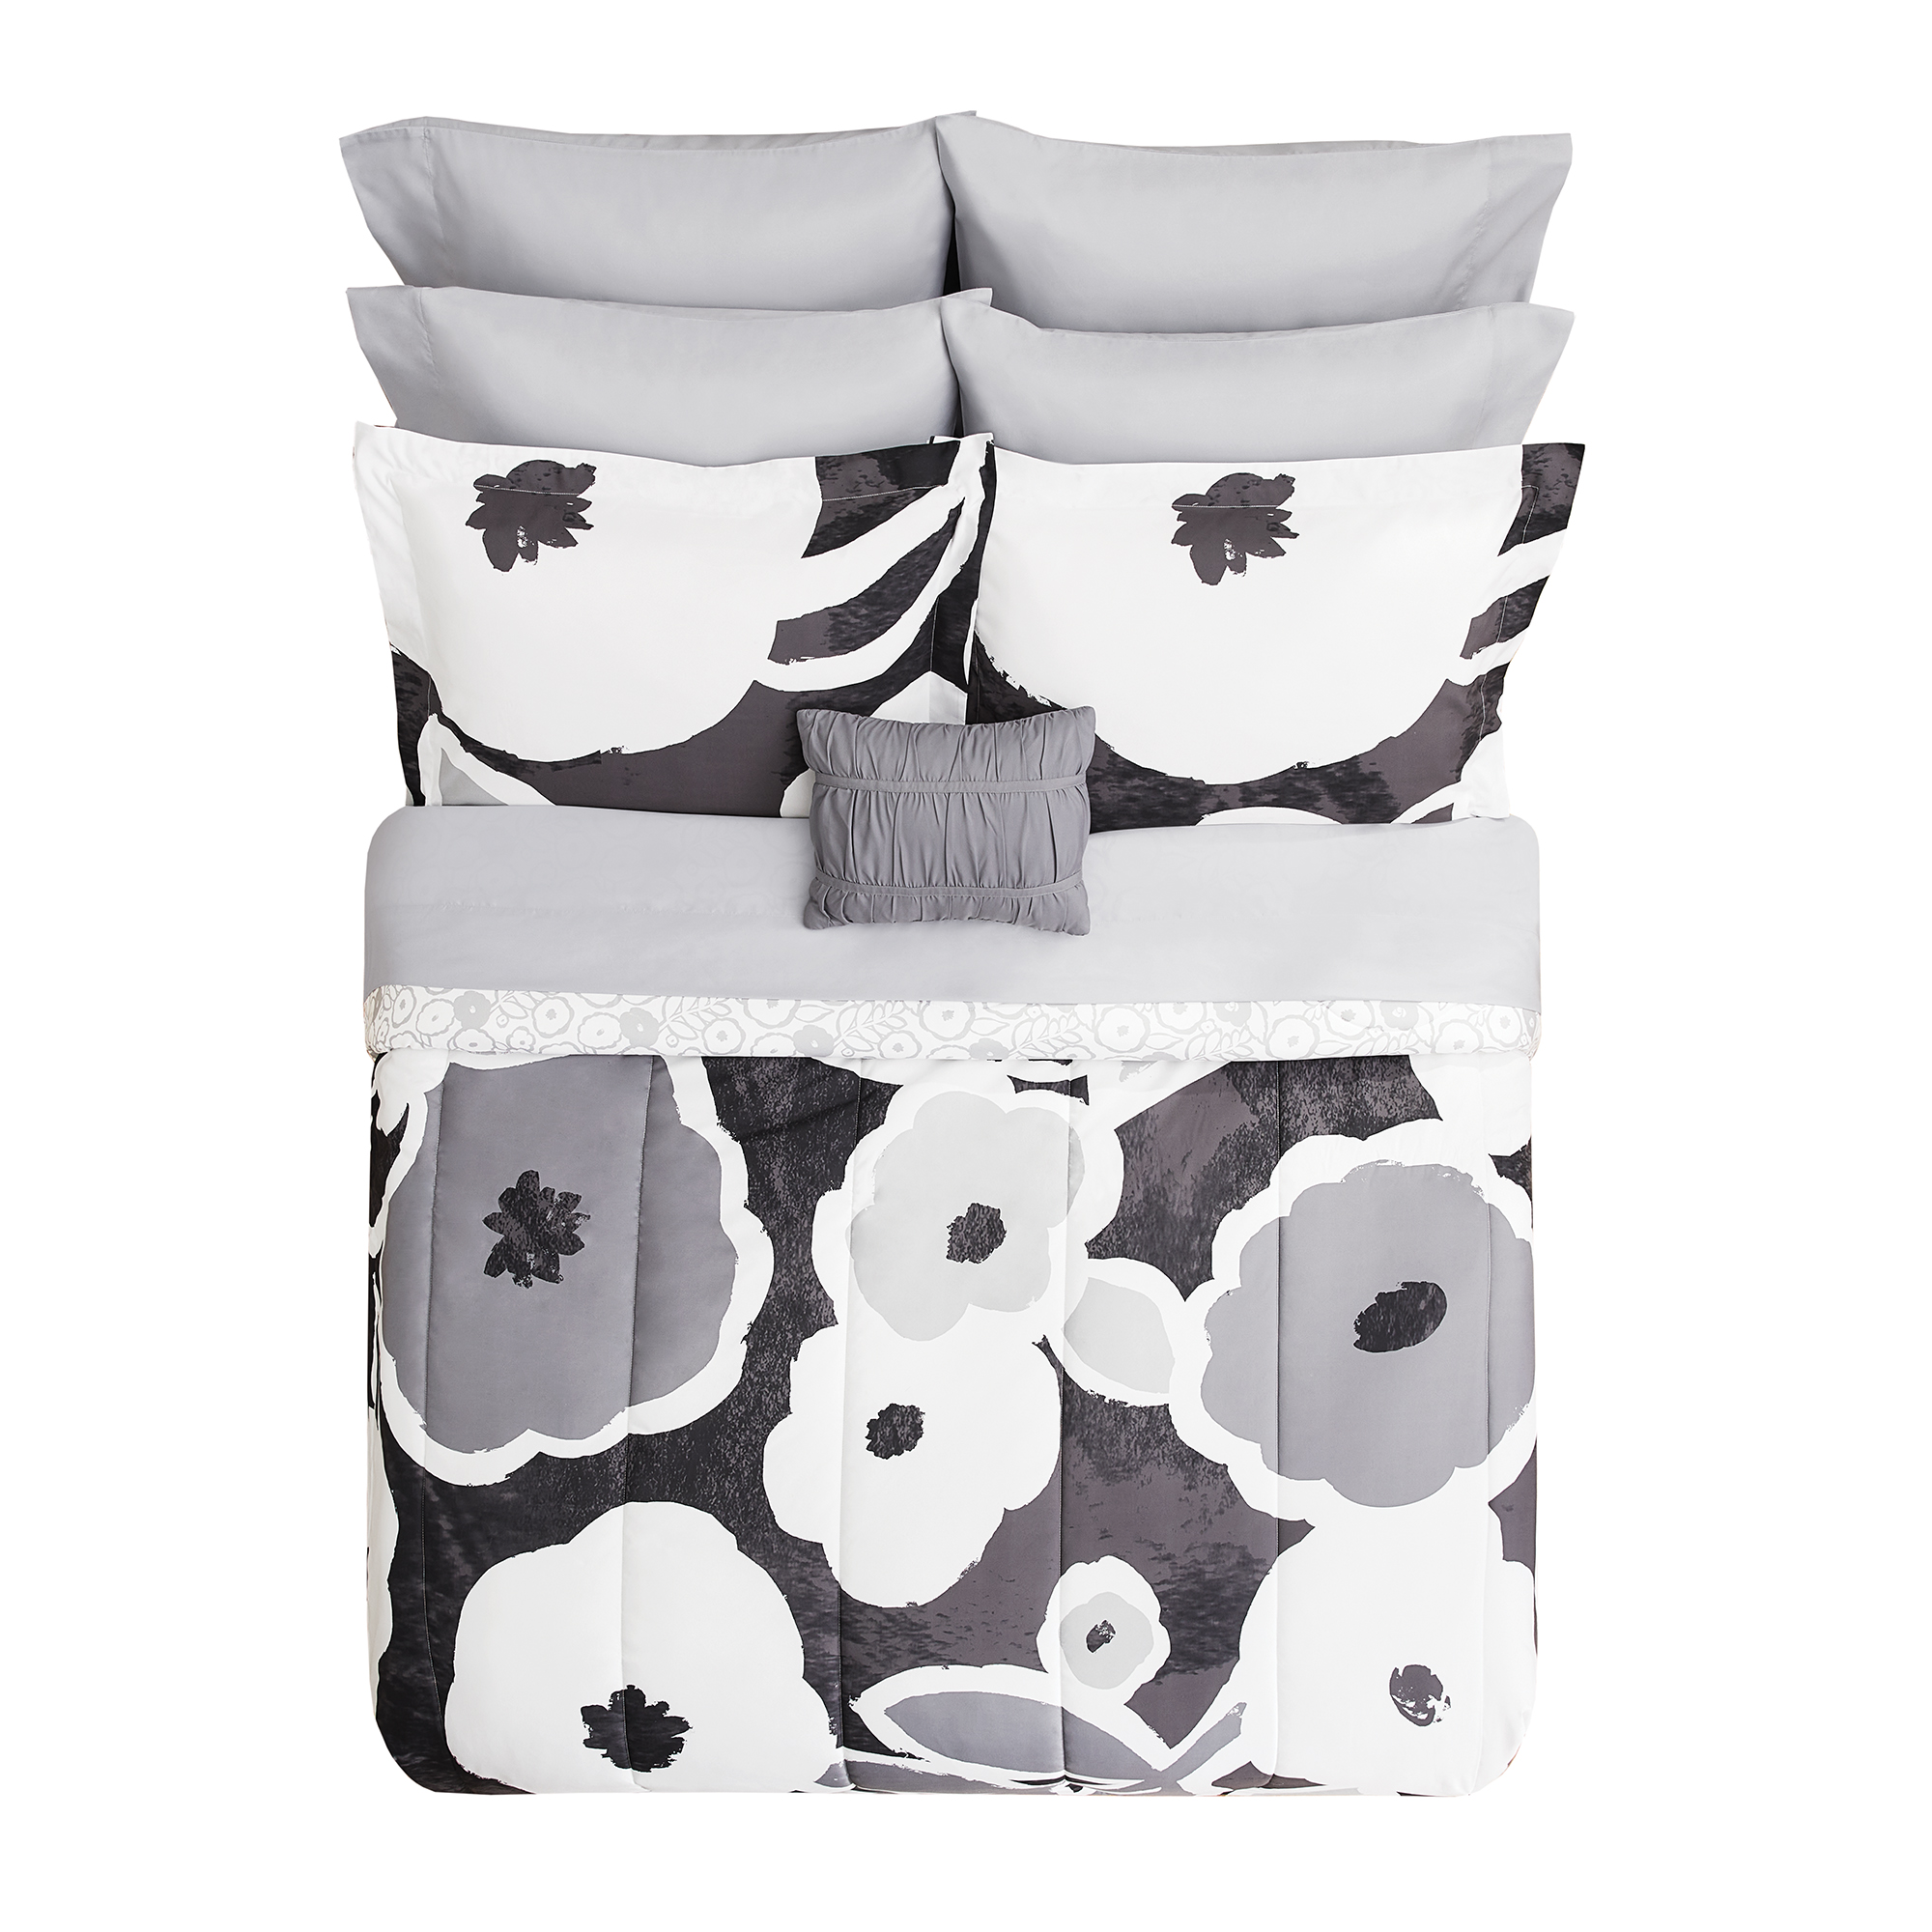 Mainstays Rich Black Floral 10 Piece Bed in a Bag Comforter Set with Sheets, Queen - image 3 of 12